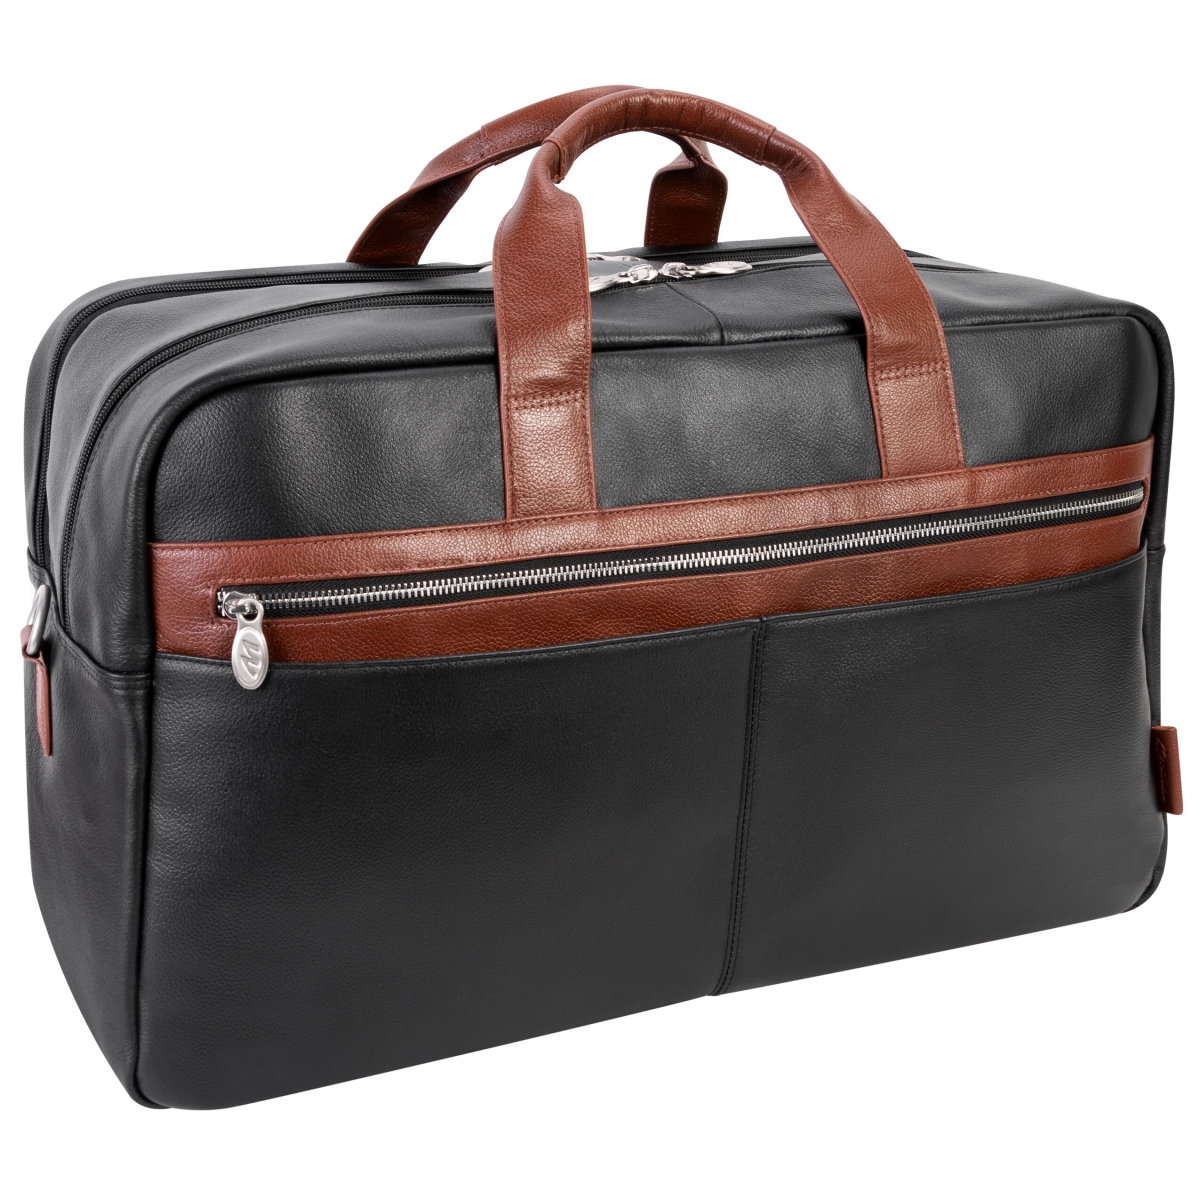 Mcklein Usa 19112 21 In. U Series Wellington Leather Two-tone Dual-compartment Laptop & Tablet Carry-all Duffel Bag, Black